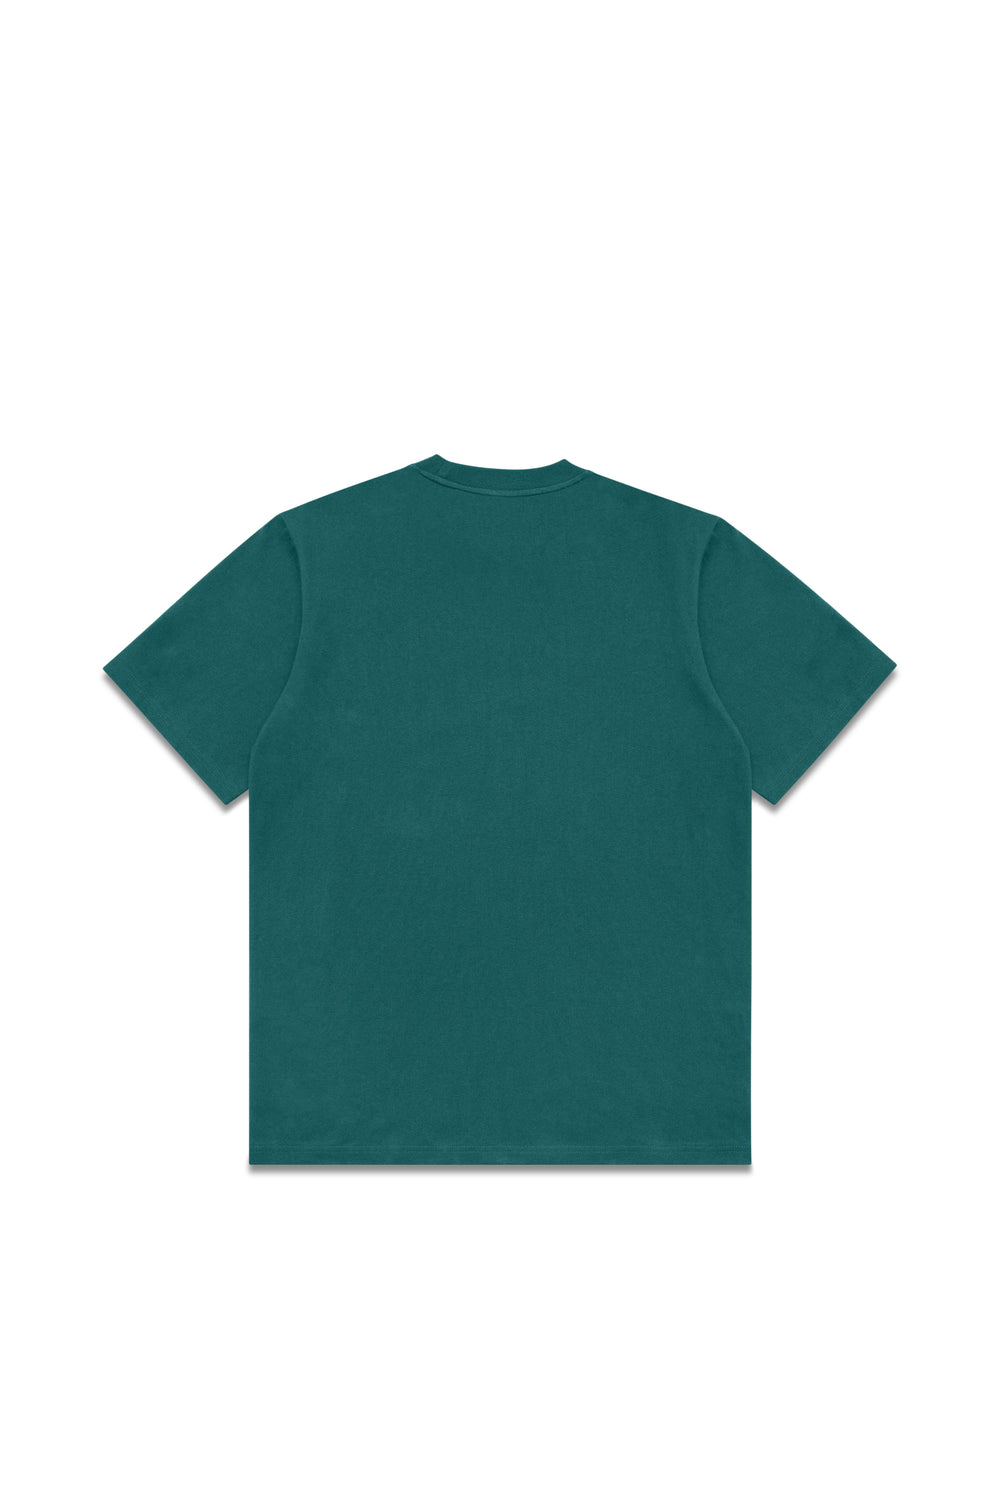 Heavy Weight Tee - Forest